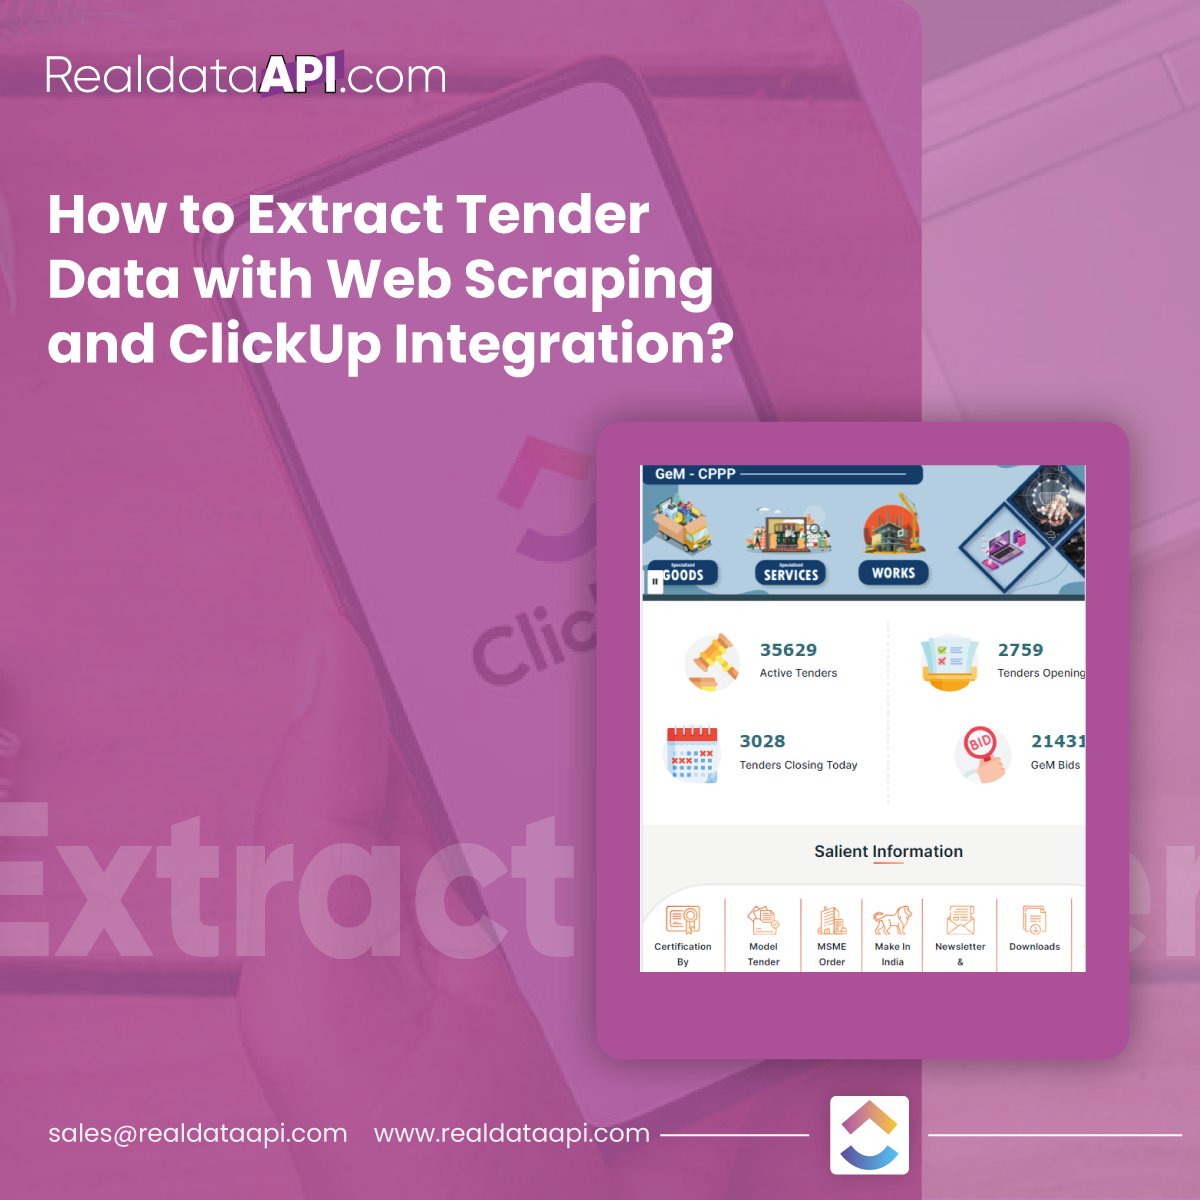 #ExtractTenderData from websites, integrating seamlessly with ClickUp for efficient management and streamlined workflow processes.

Know More: realdataapi.com/extract-tender…

#TenderDataScraper #TenderDataScrapingApplication
#TenderDataExtraction #RealDataAPI #usa #uk #uae
#canada